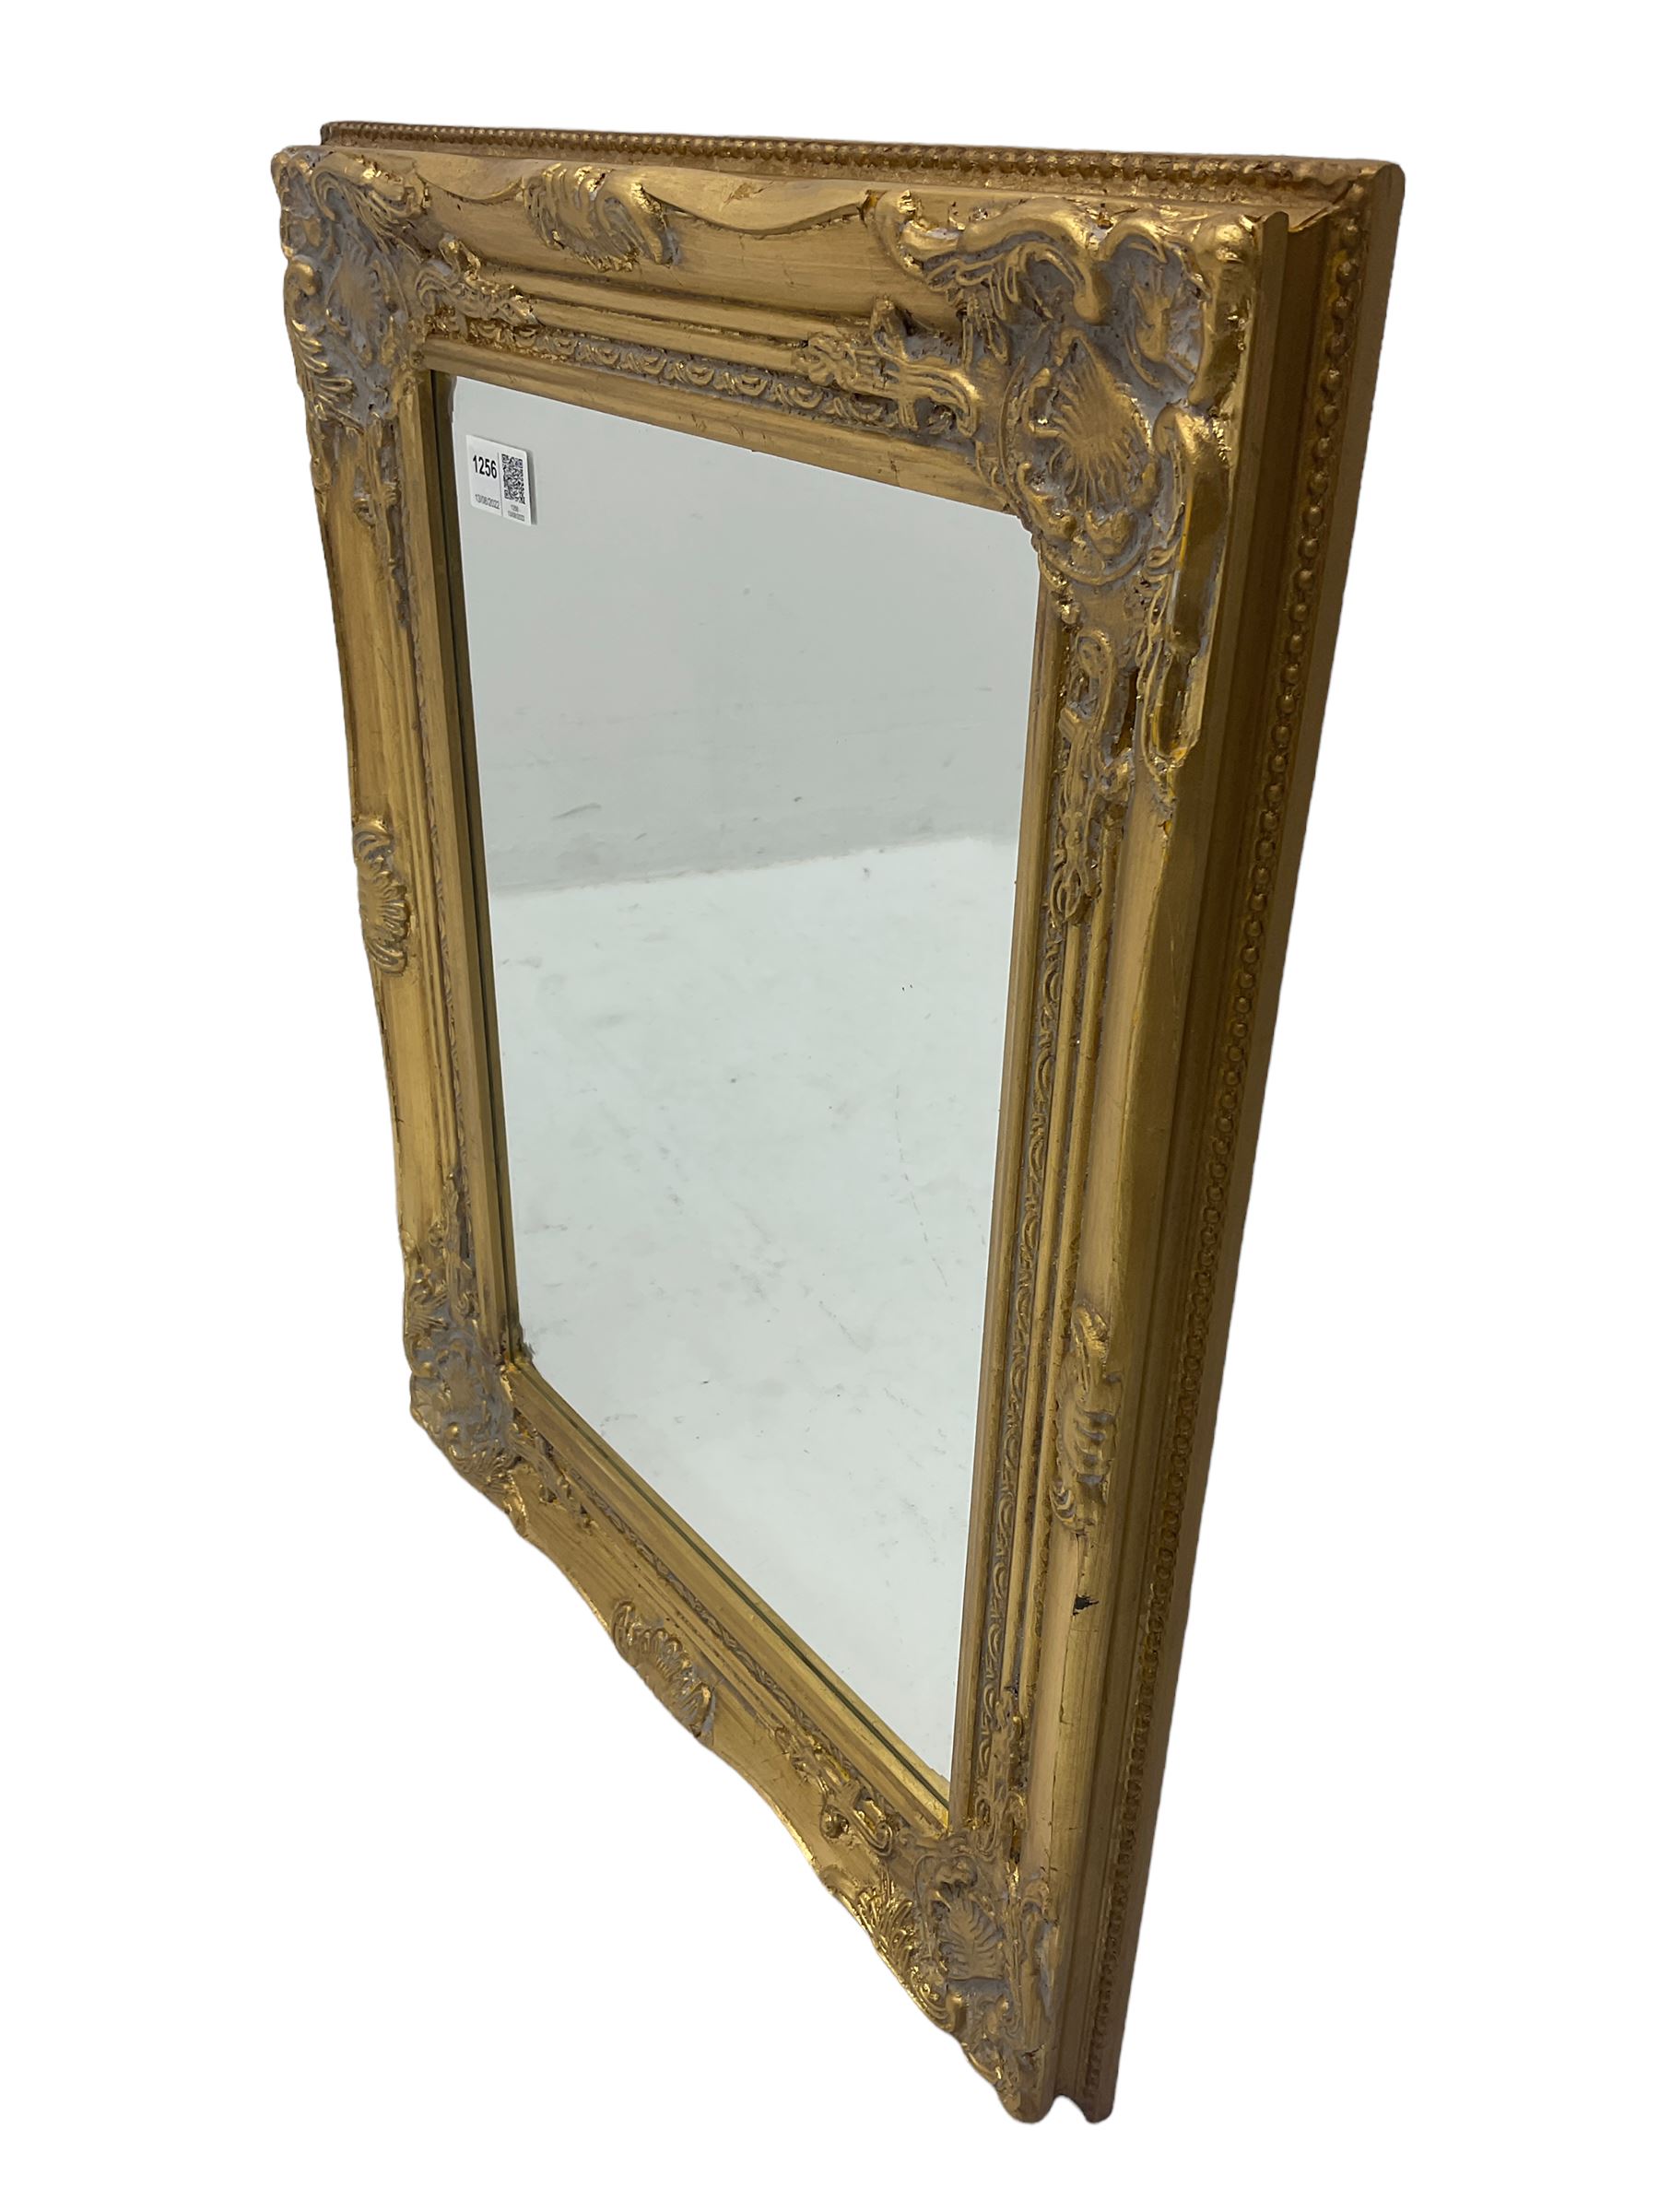 Pair of small gold finish classical wall mirrors - Image 4 of 4